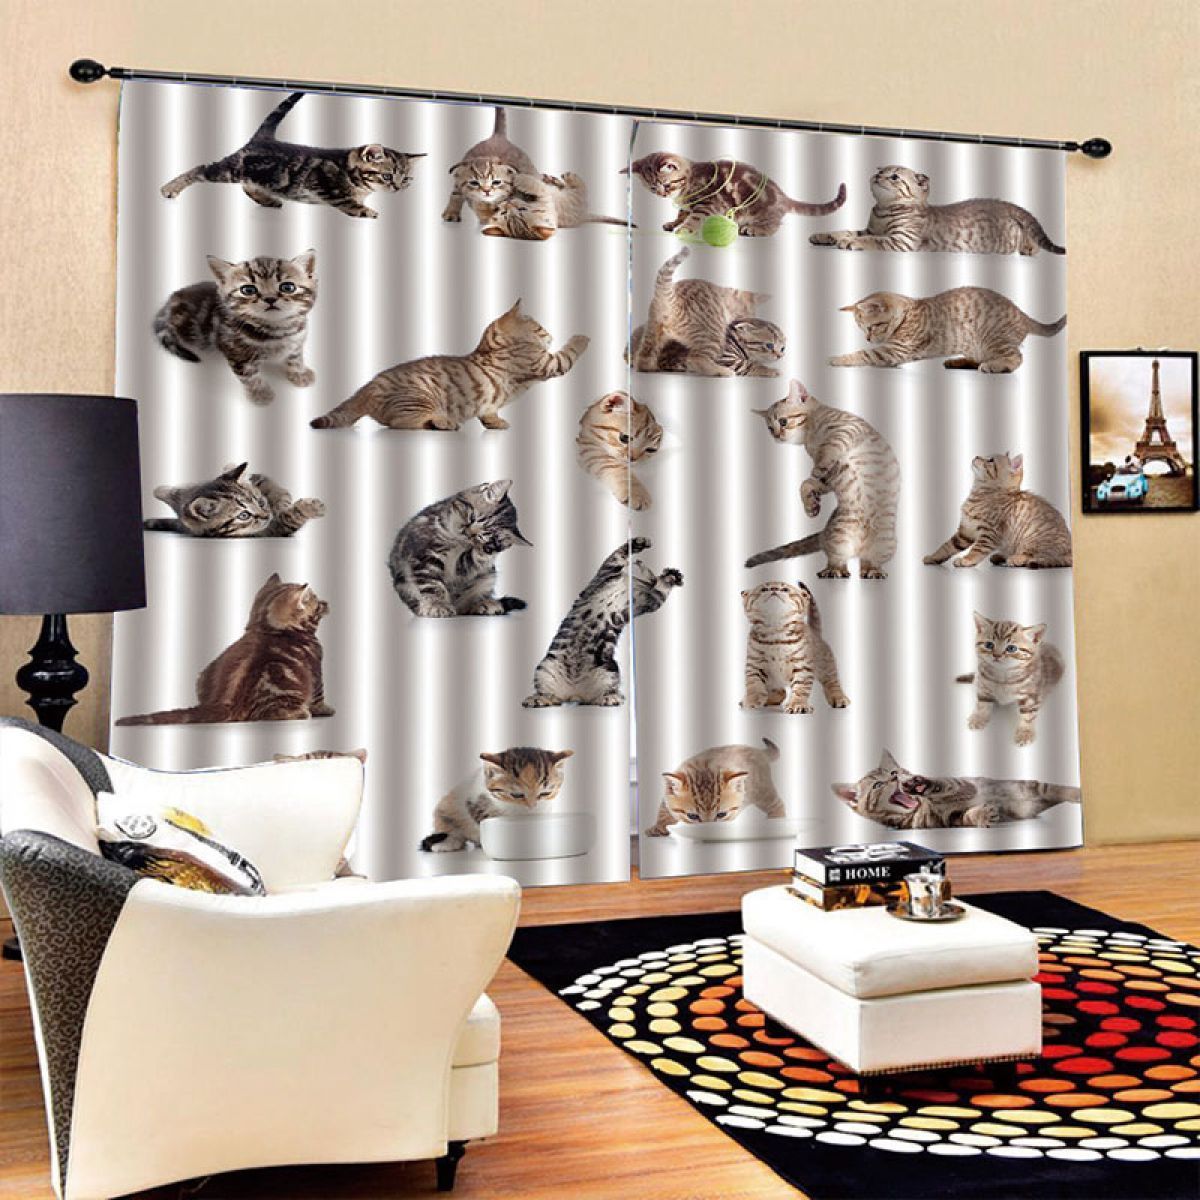 3d cat hanging printed window curtain home decor 7540